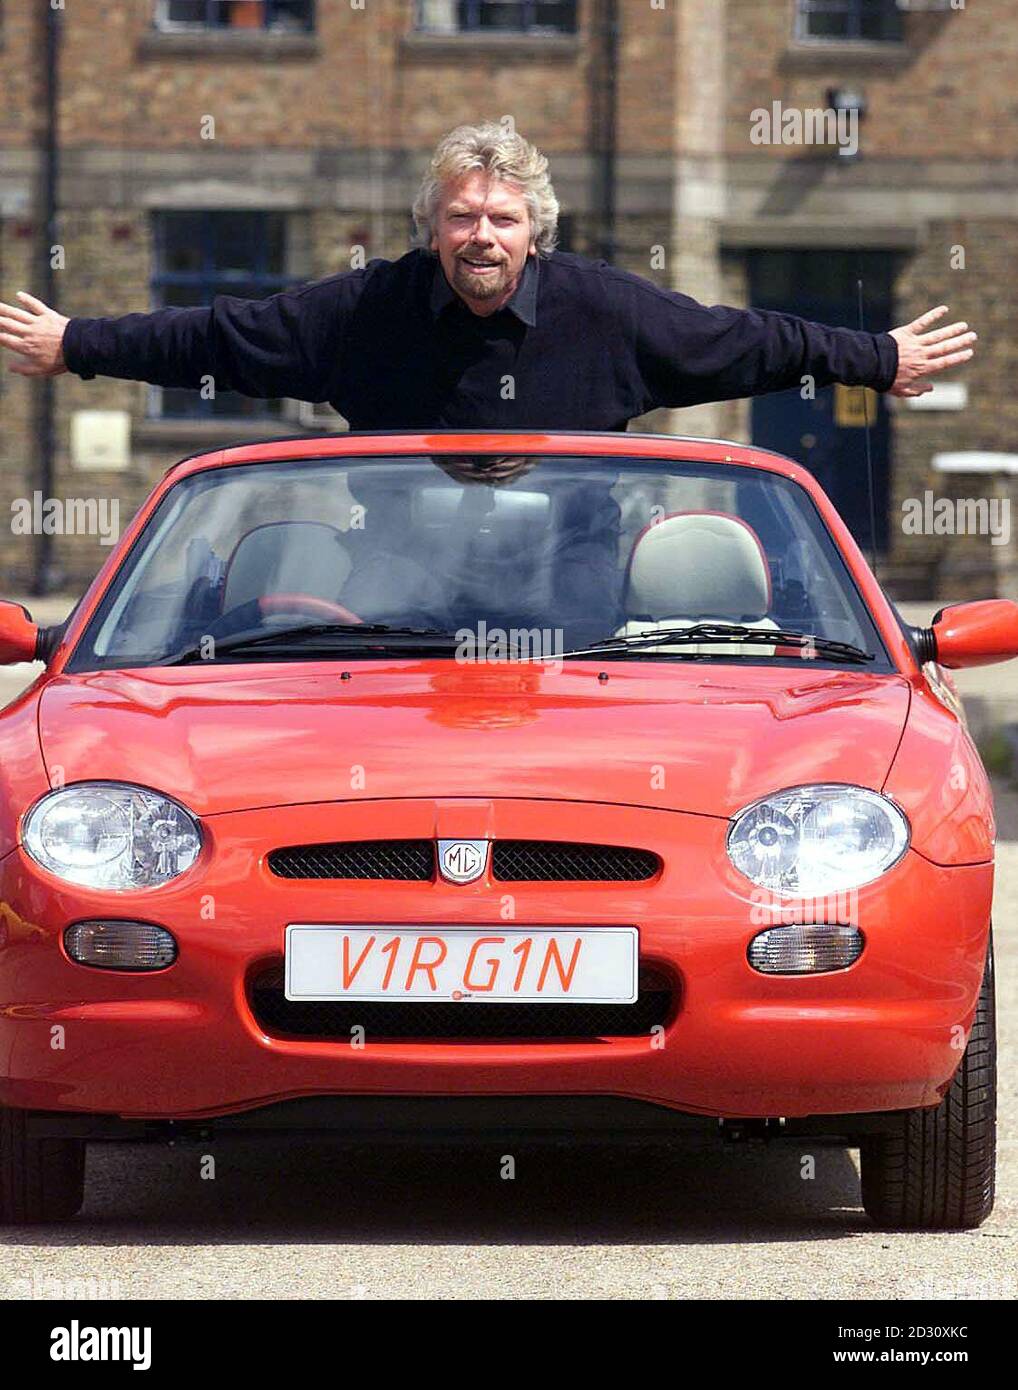 Virgin boss Sir Richard Branson at the launch of Virgin Cars in London. The service via internet (www.virgin.com/cars) promises consumers a saving on cars of up to 30% lower than existing prices. Stock Photo